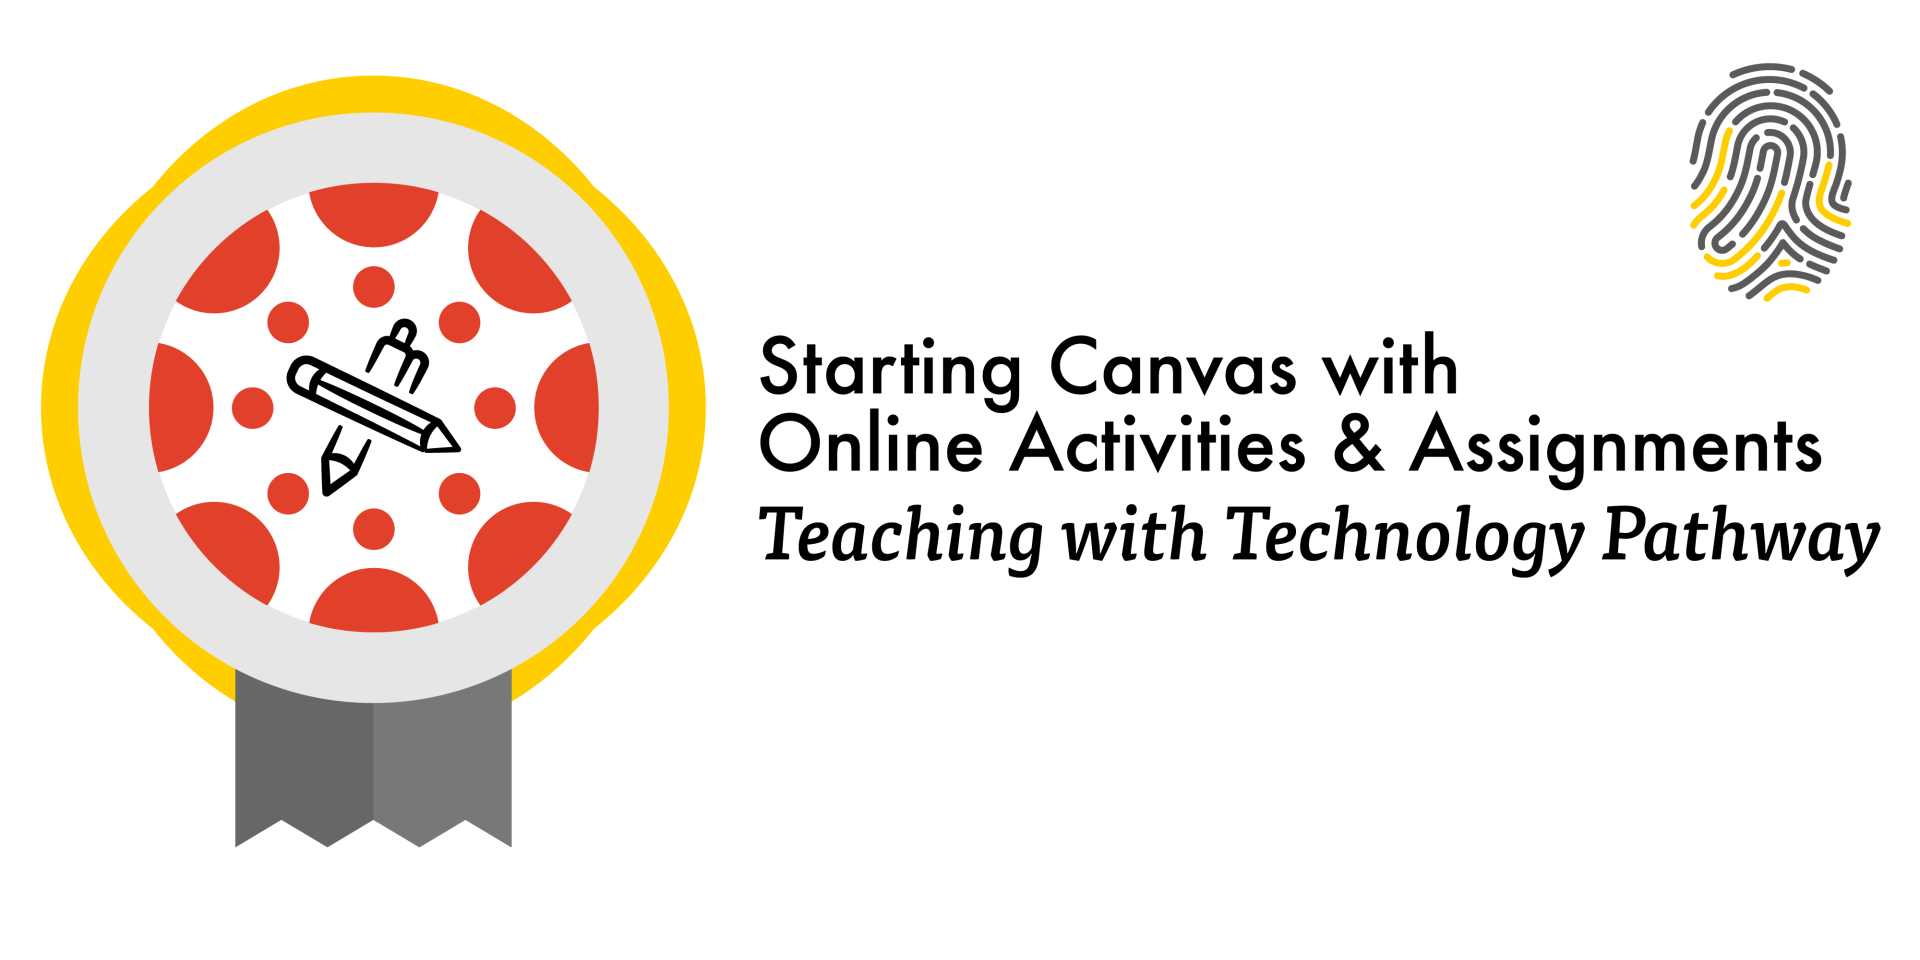 Starting Canvas with Online Activities & Assignments, Teaching with Technology Pathway